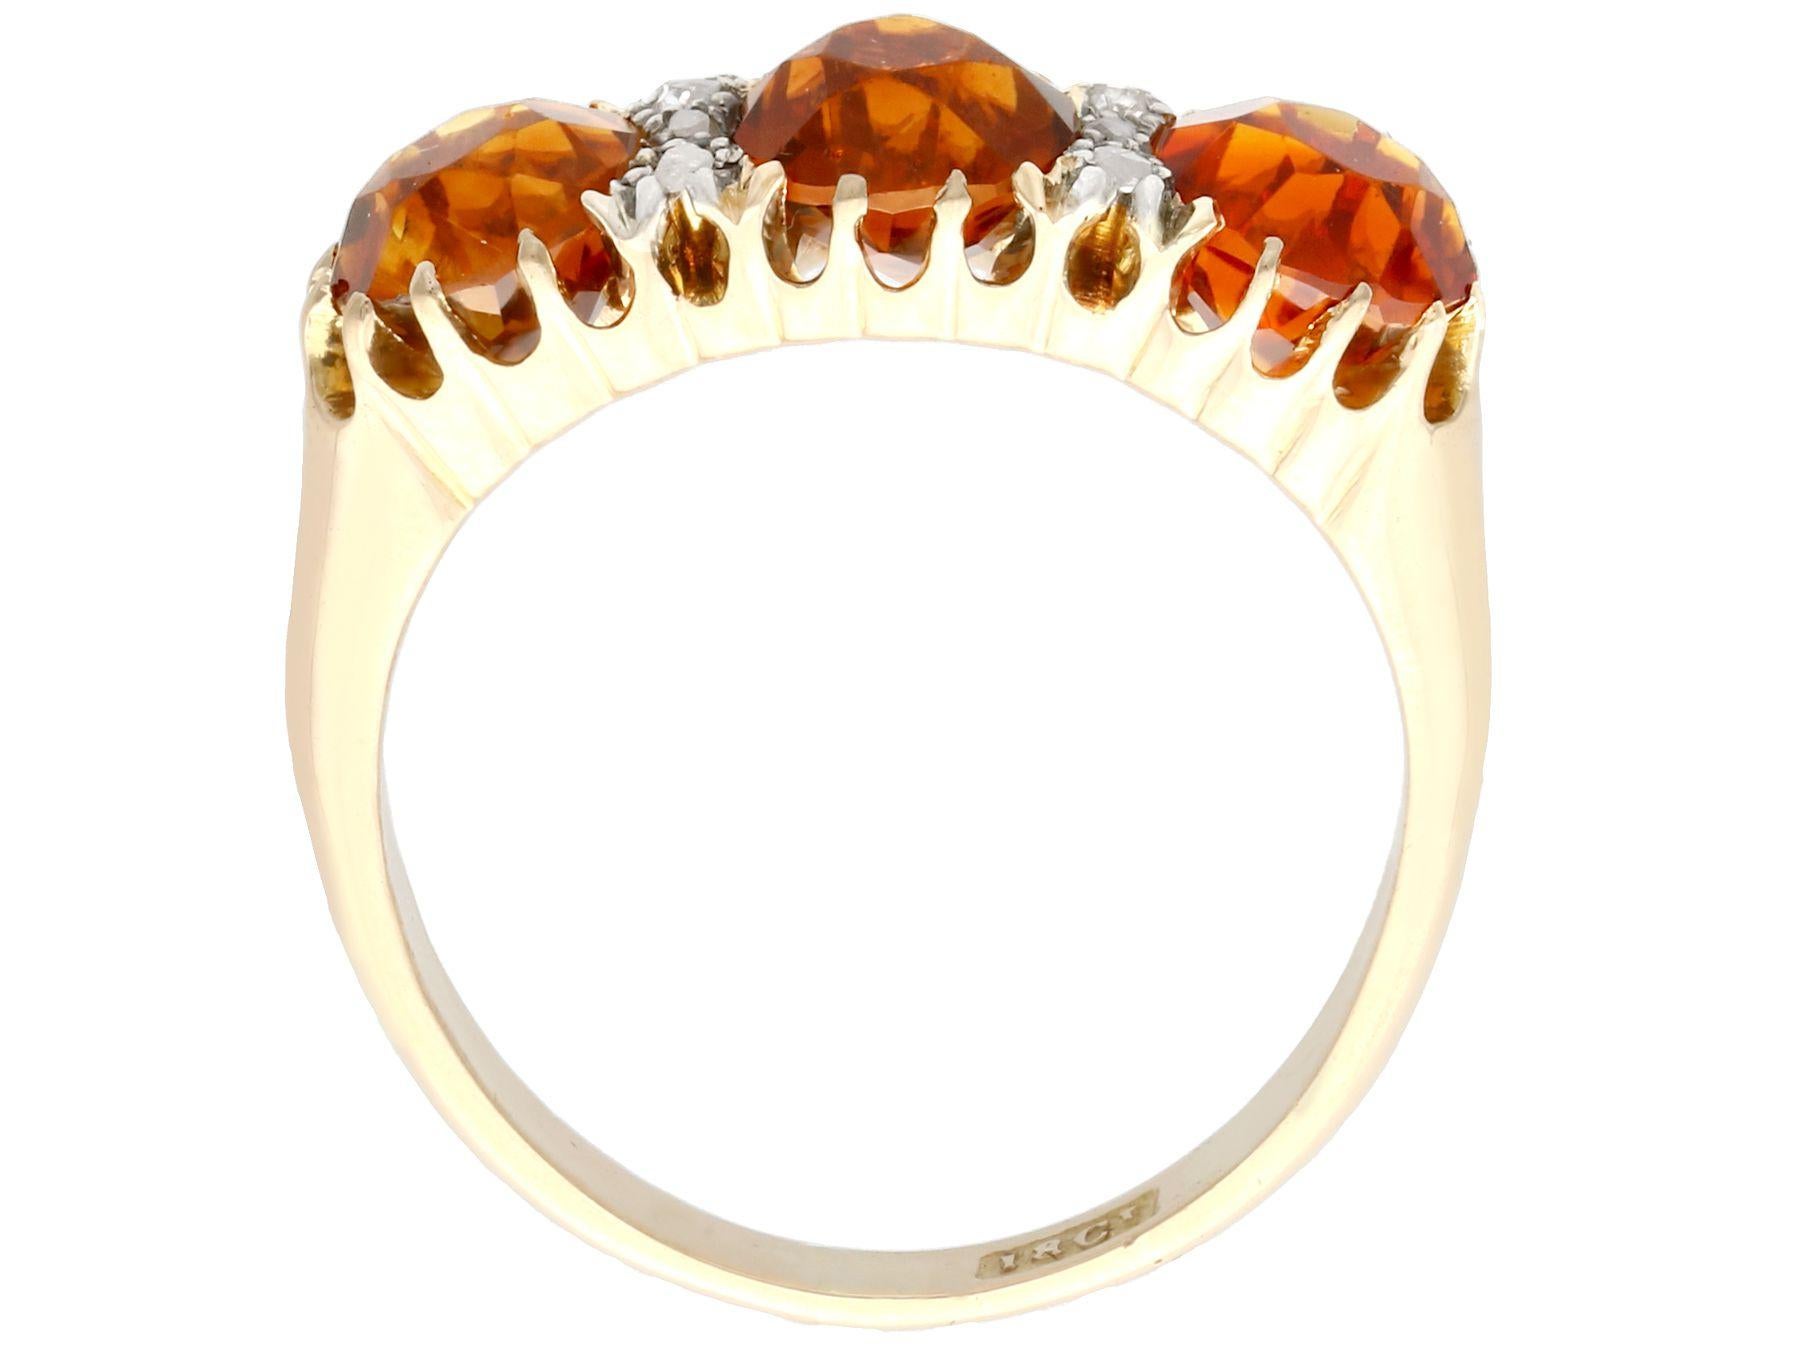 Oval Cut Antique 2.76 Carat Citrine and Diamond Yellow Gold Cocktail Ring, Circa 1930